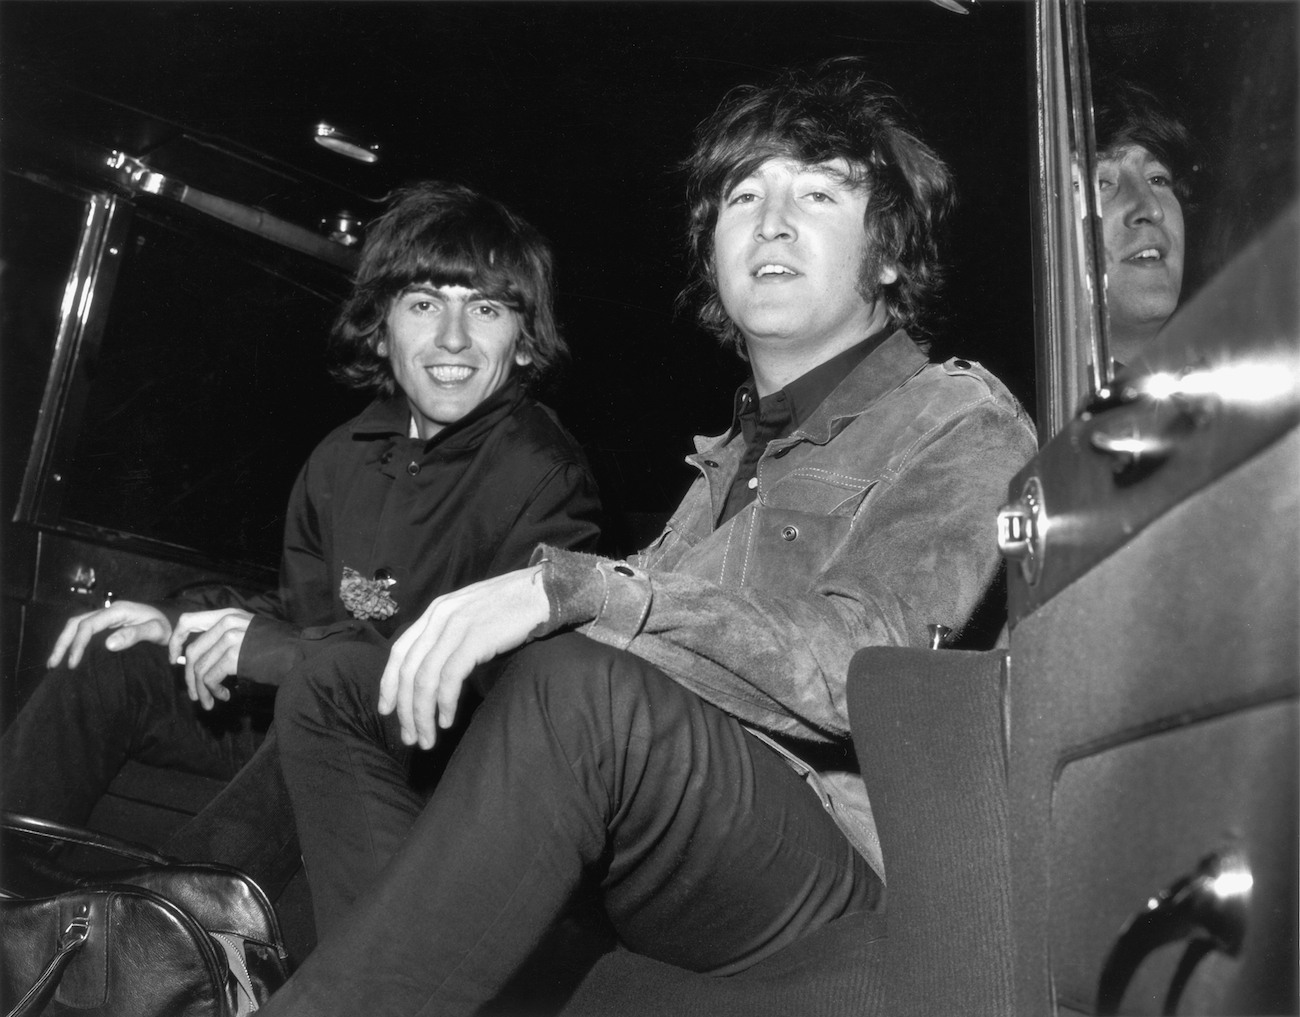 George Harrison and John Lennon at the airport in 1965.